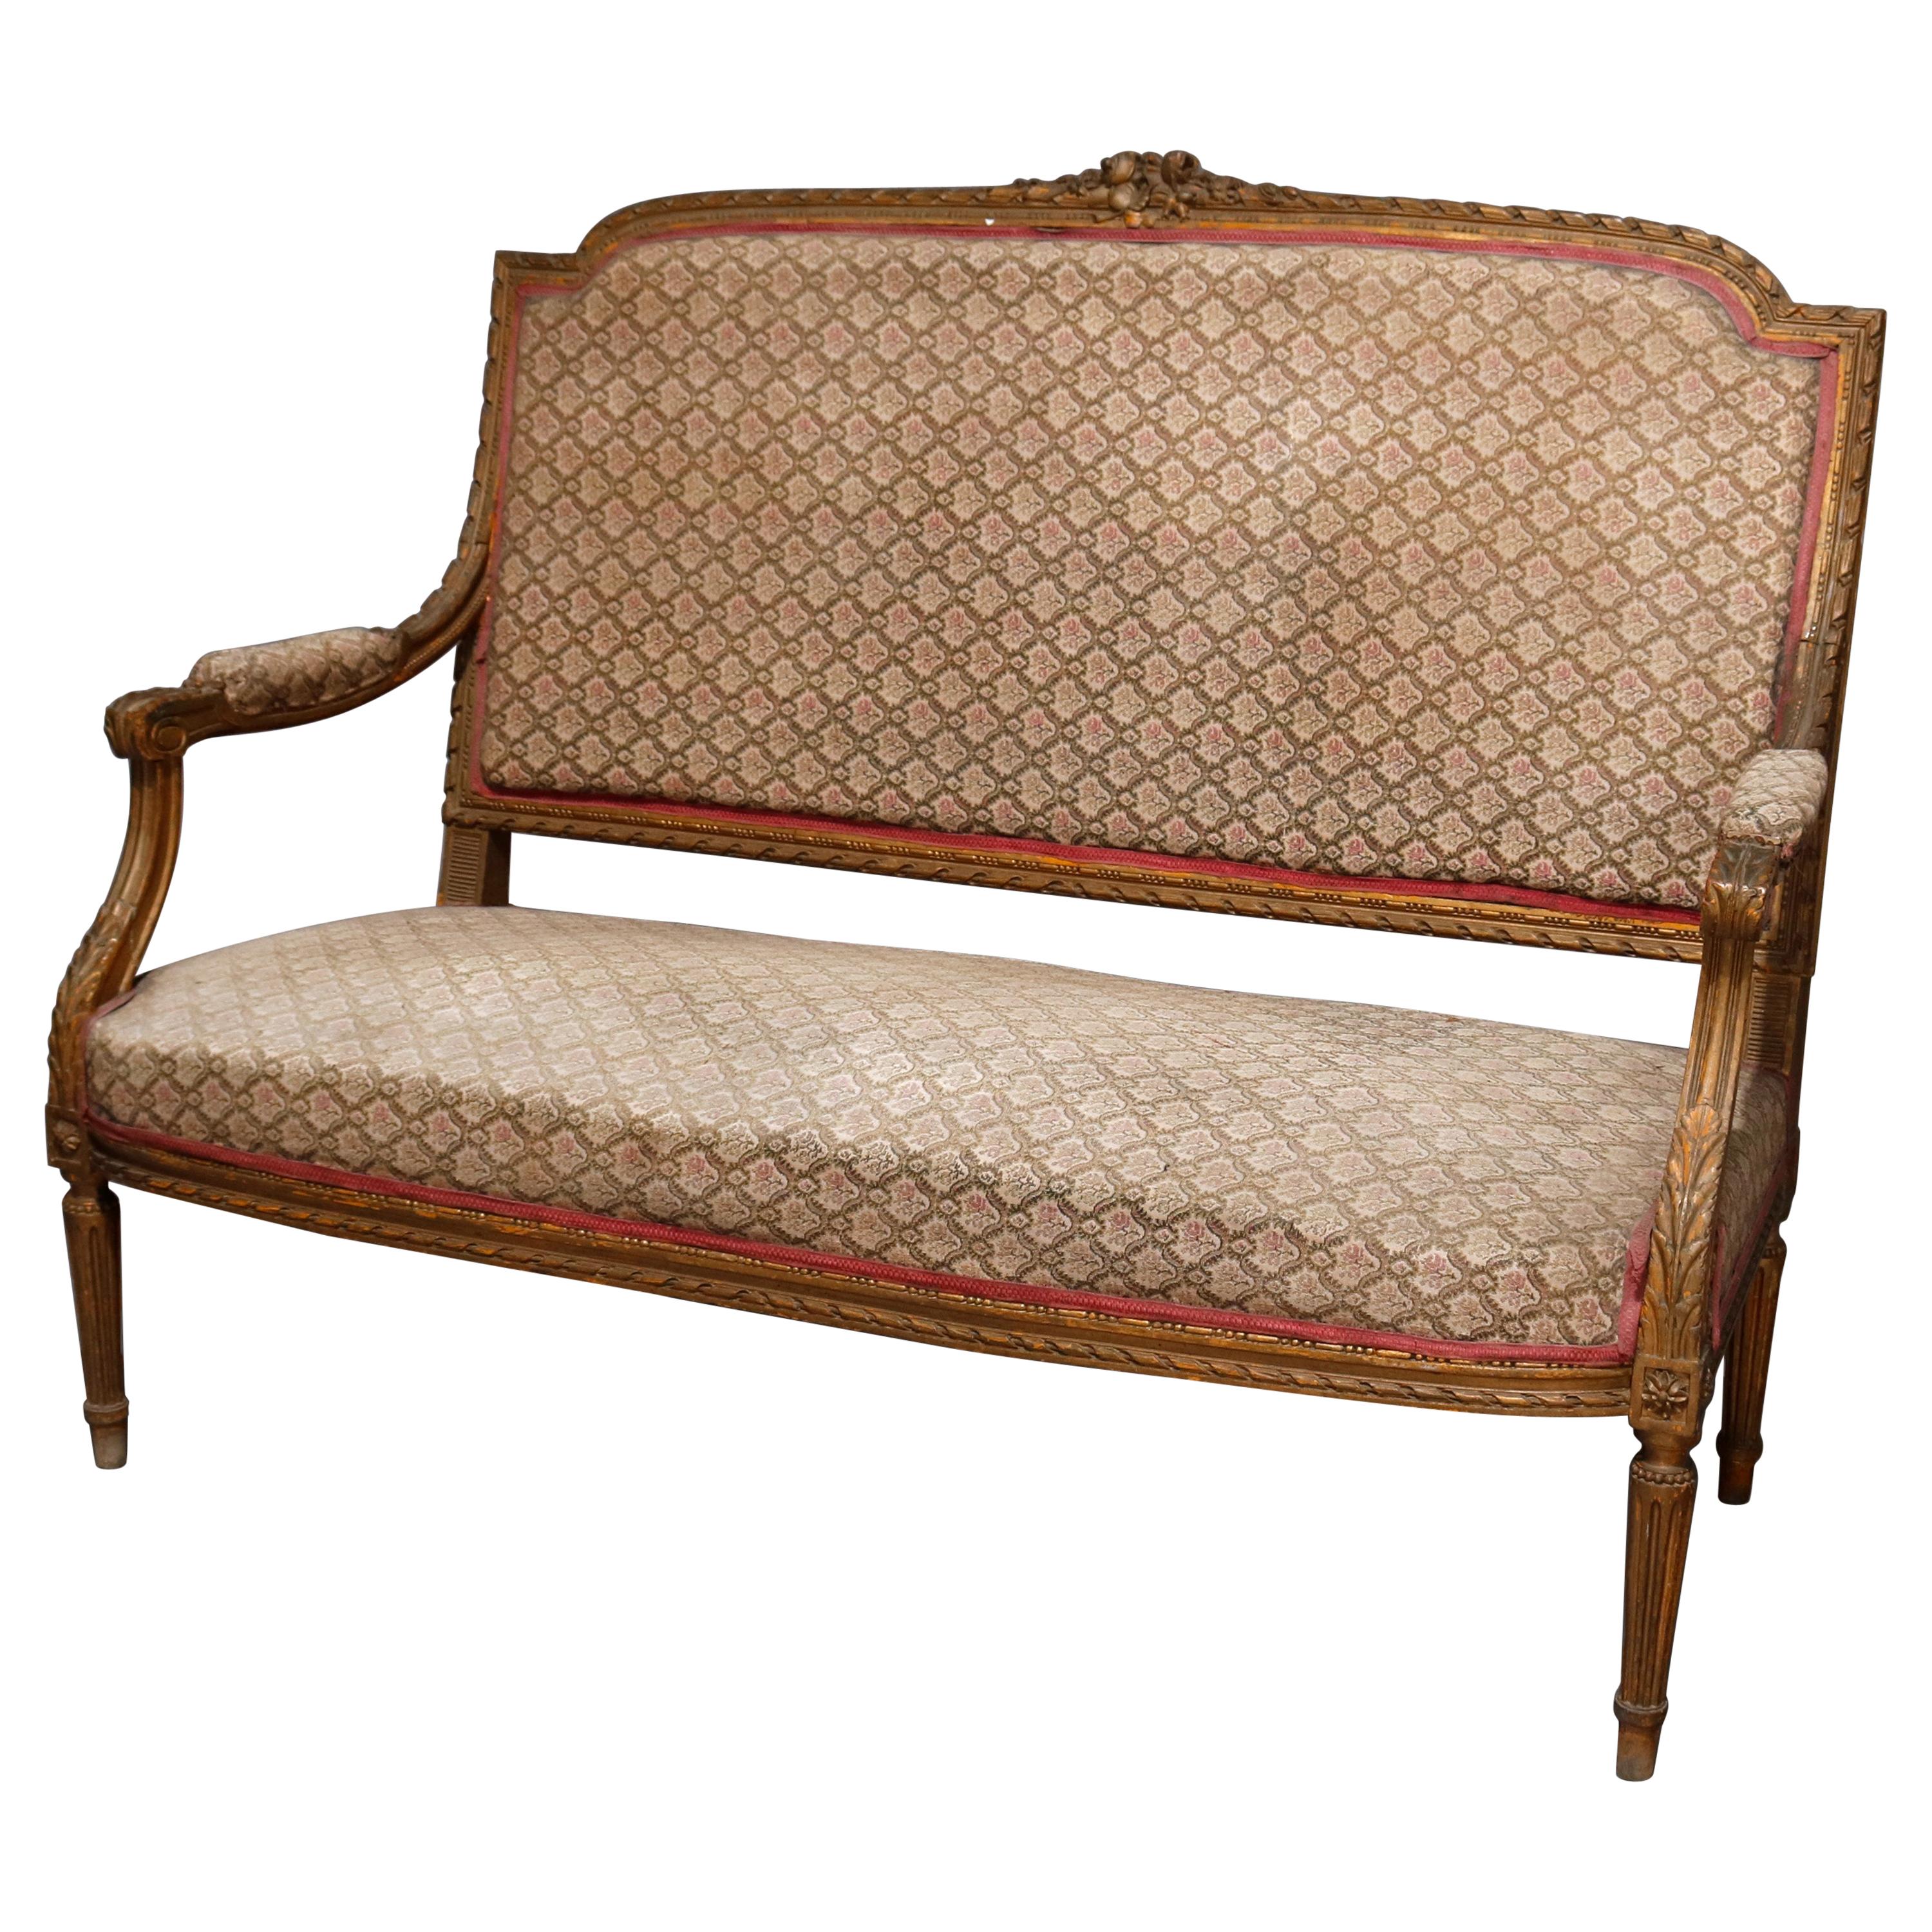 Antique French Louis XVI Carved Giltwood Parlor Settee, 19th Century